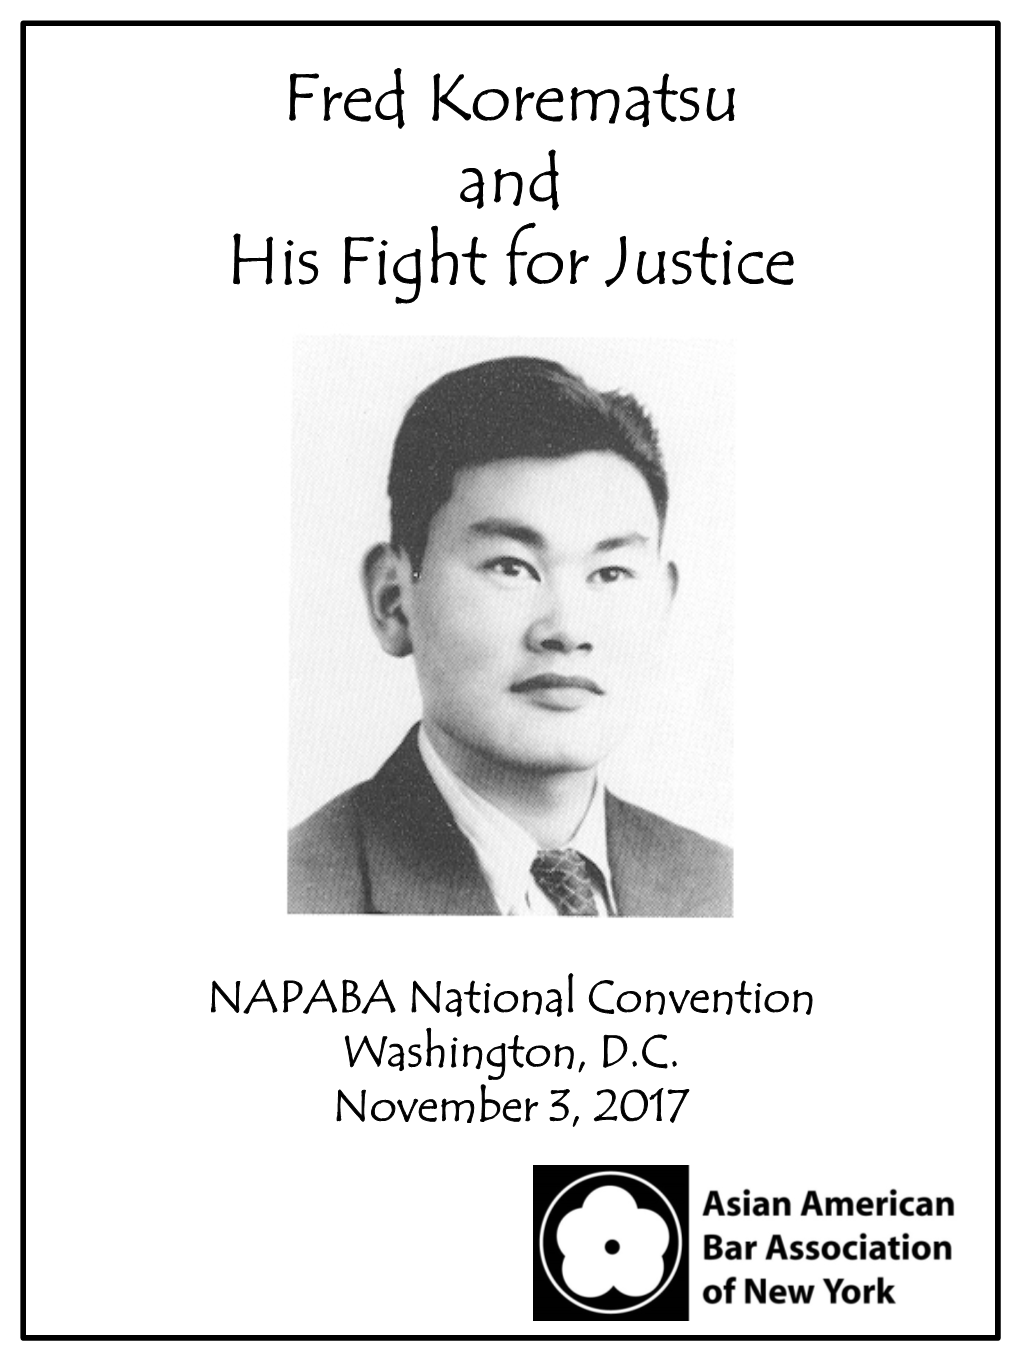 Fred Korematsu and His Fight for Justice